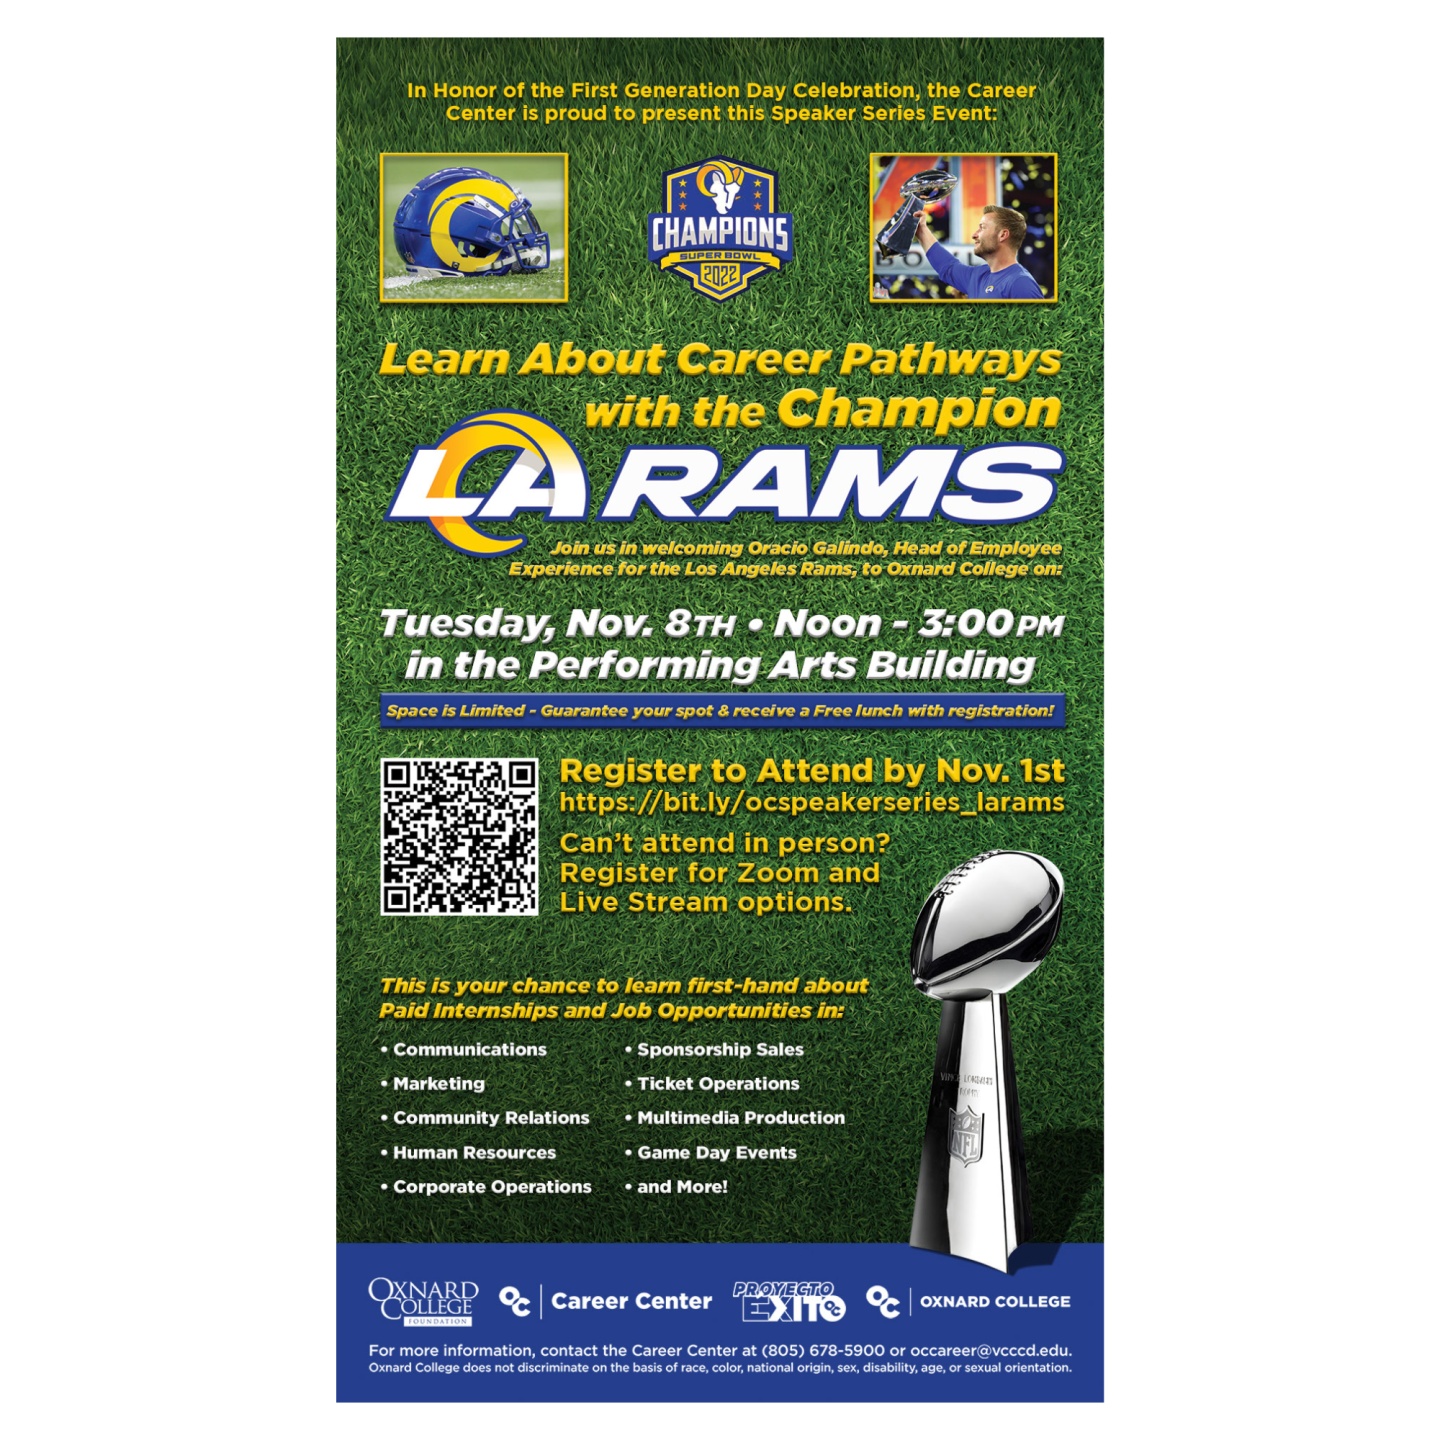 grass background with L.A. Rams images and Super Bowl trophy in bottom right corner